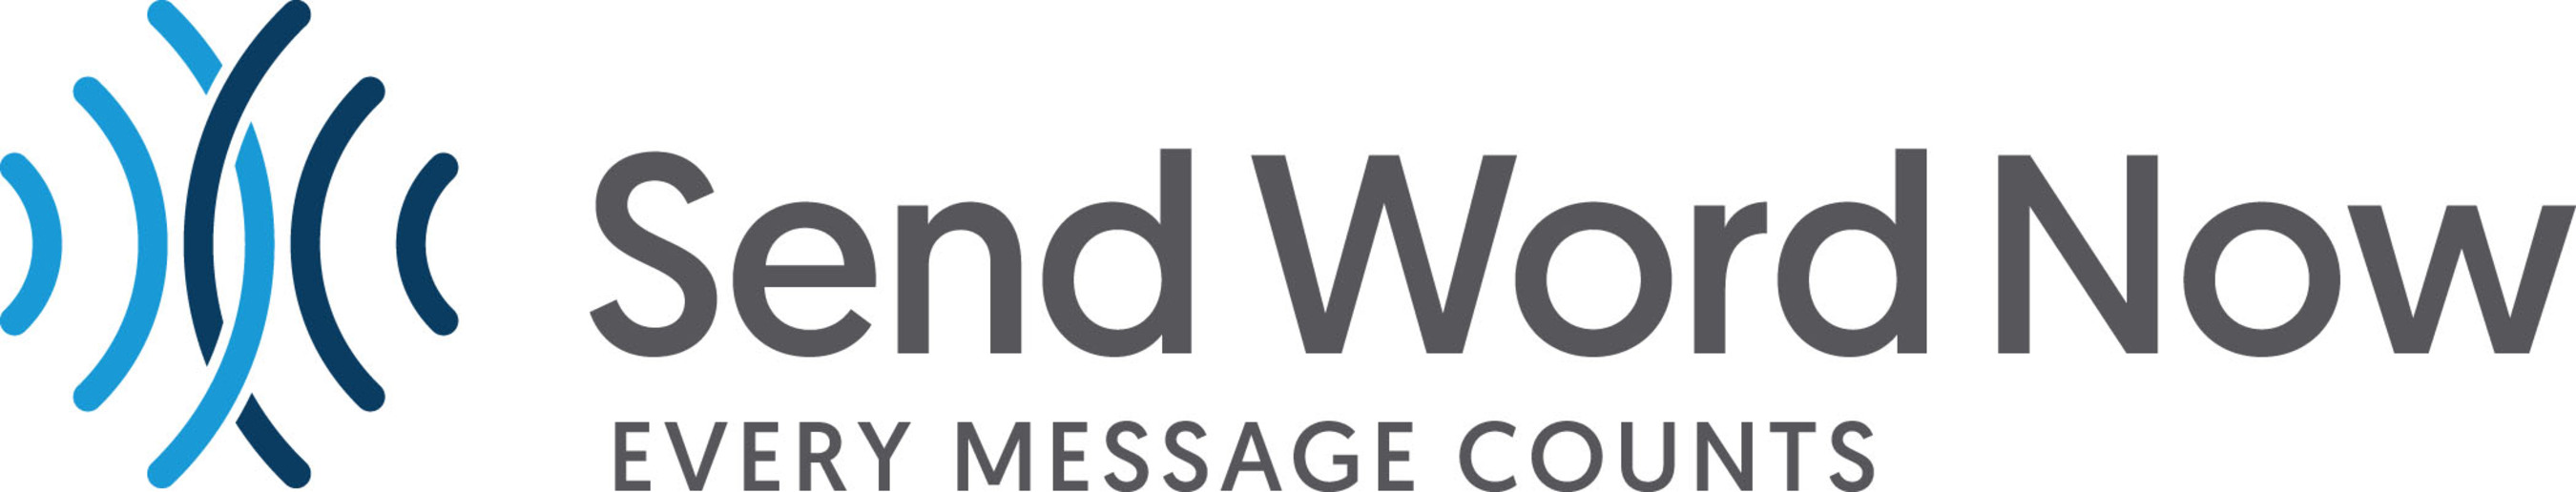 Send Word Now is the worldwide leader in enterprise communications and mass notification.